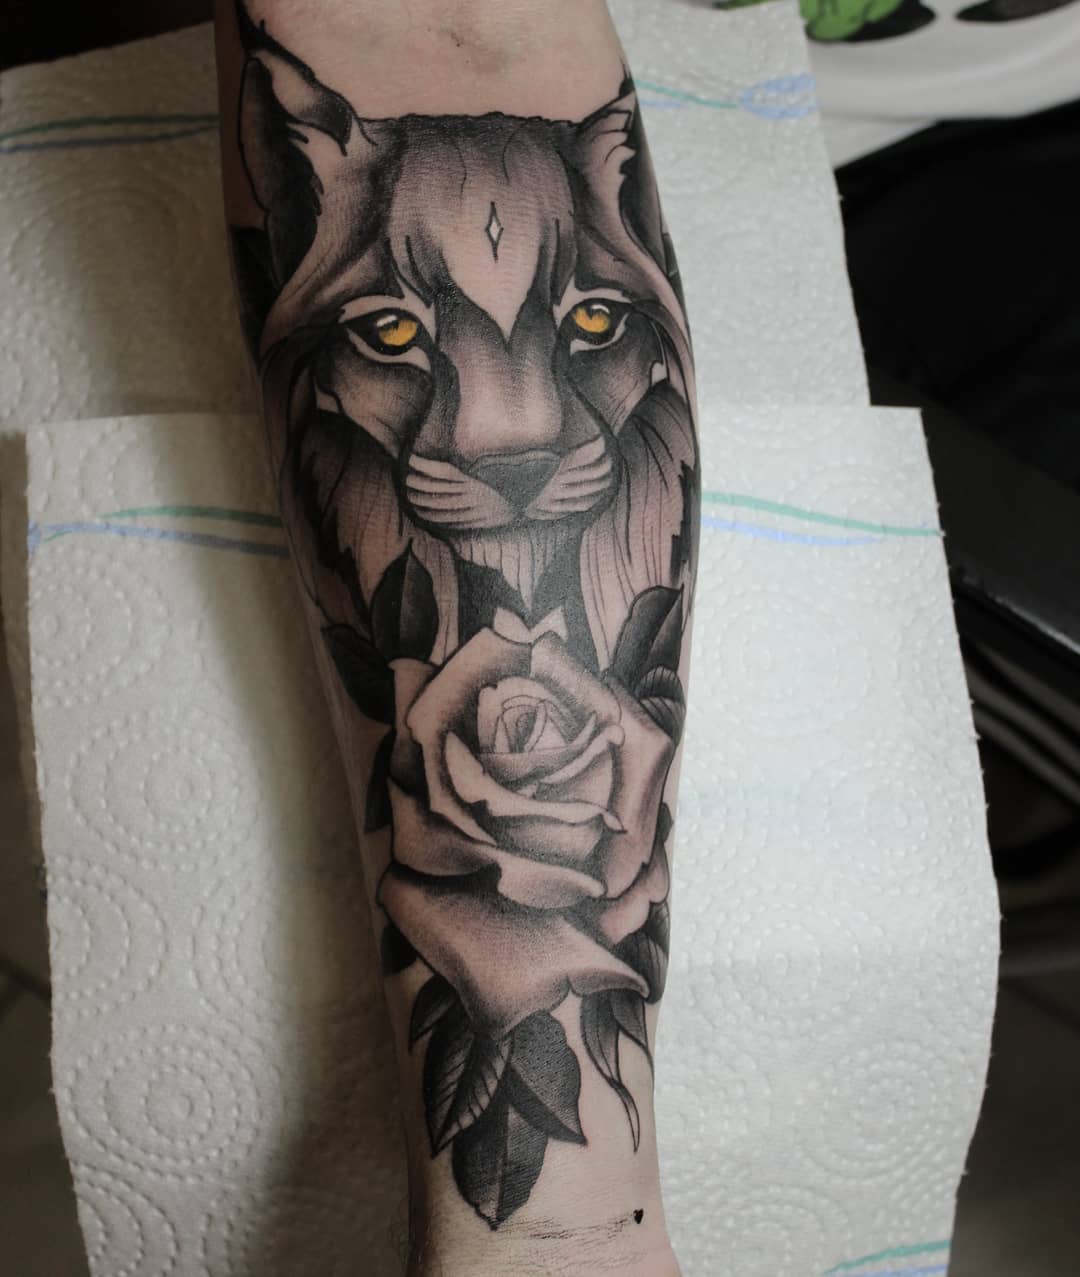 Lynx and rose from today. Thank you nico for sitting like a rock
#germantattooer